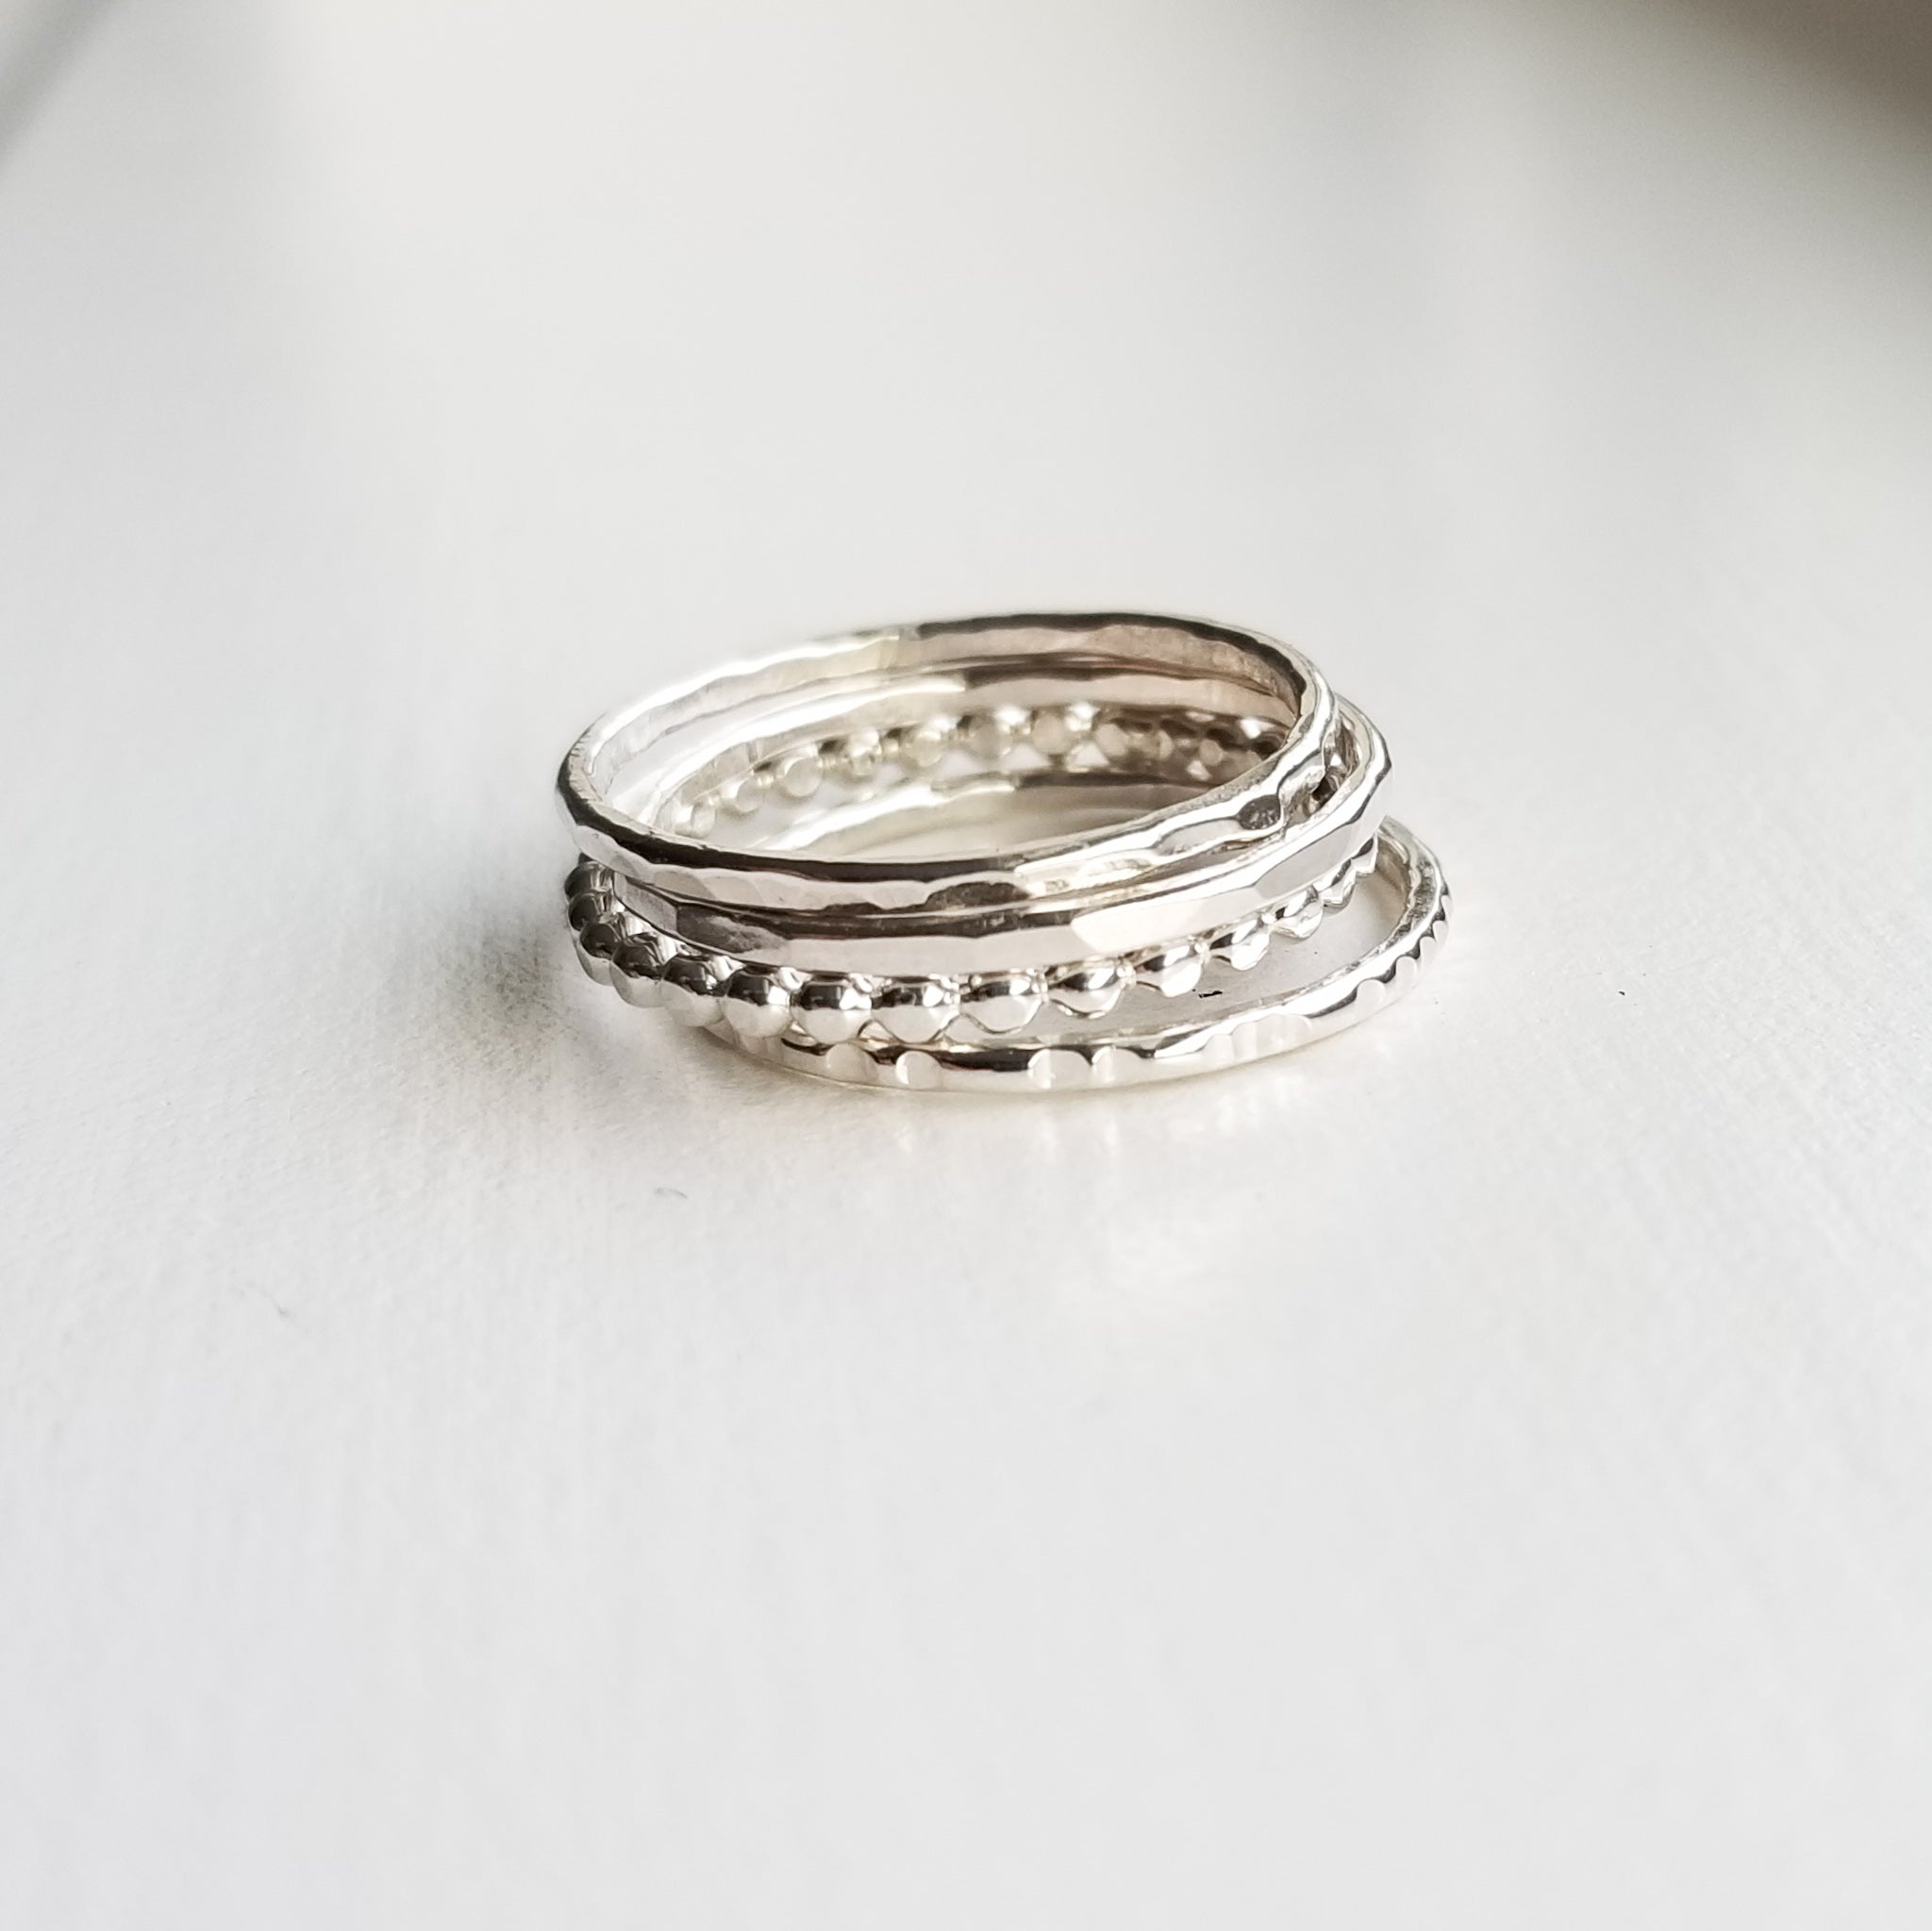 a stack of various silver band style rings on a white background